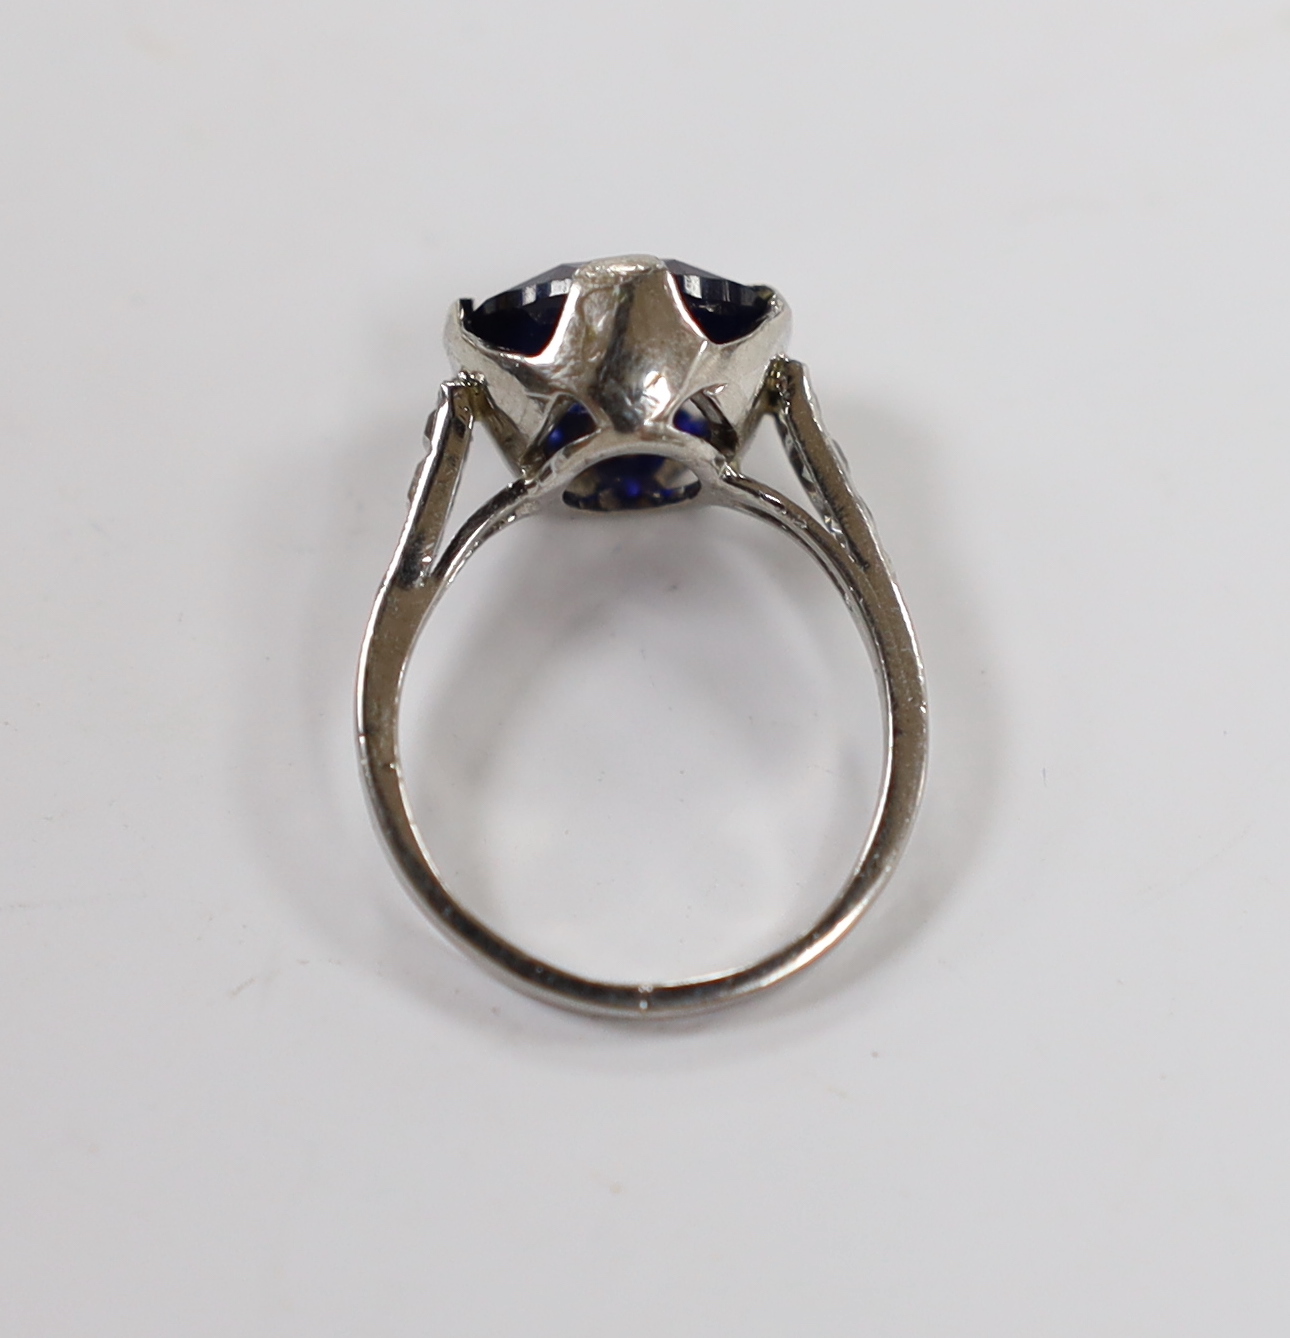 A plat. and iridium, single stone oval cut synthetic sapphire set ring, with graduated diamond chip set shoulders, the shank bearing the signature 'Tiffany & Co', size G, gross weight 3.7 grams.